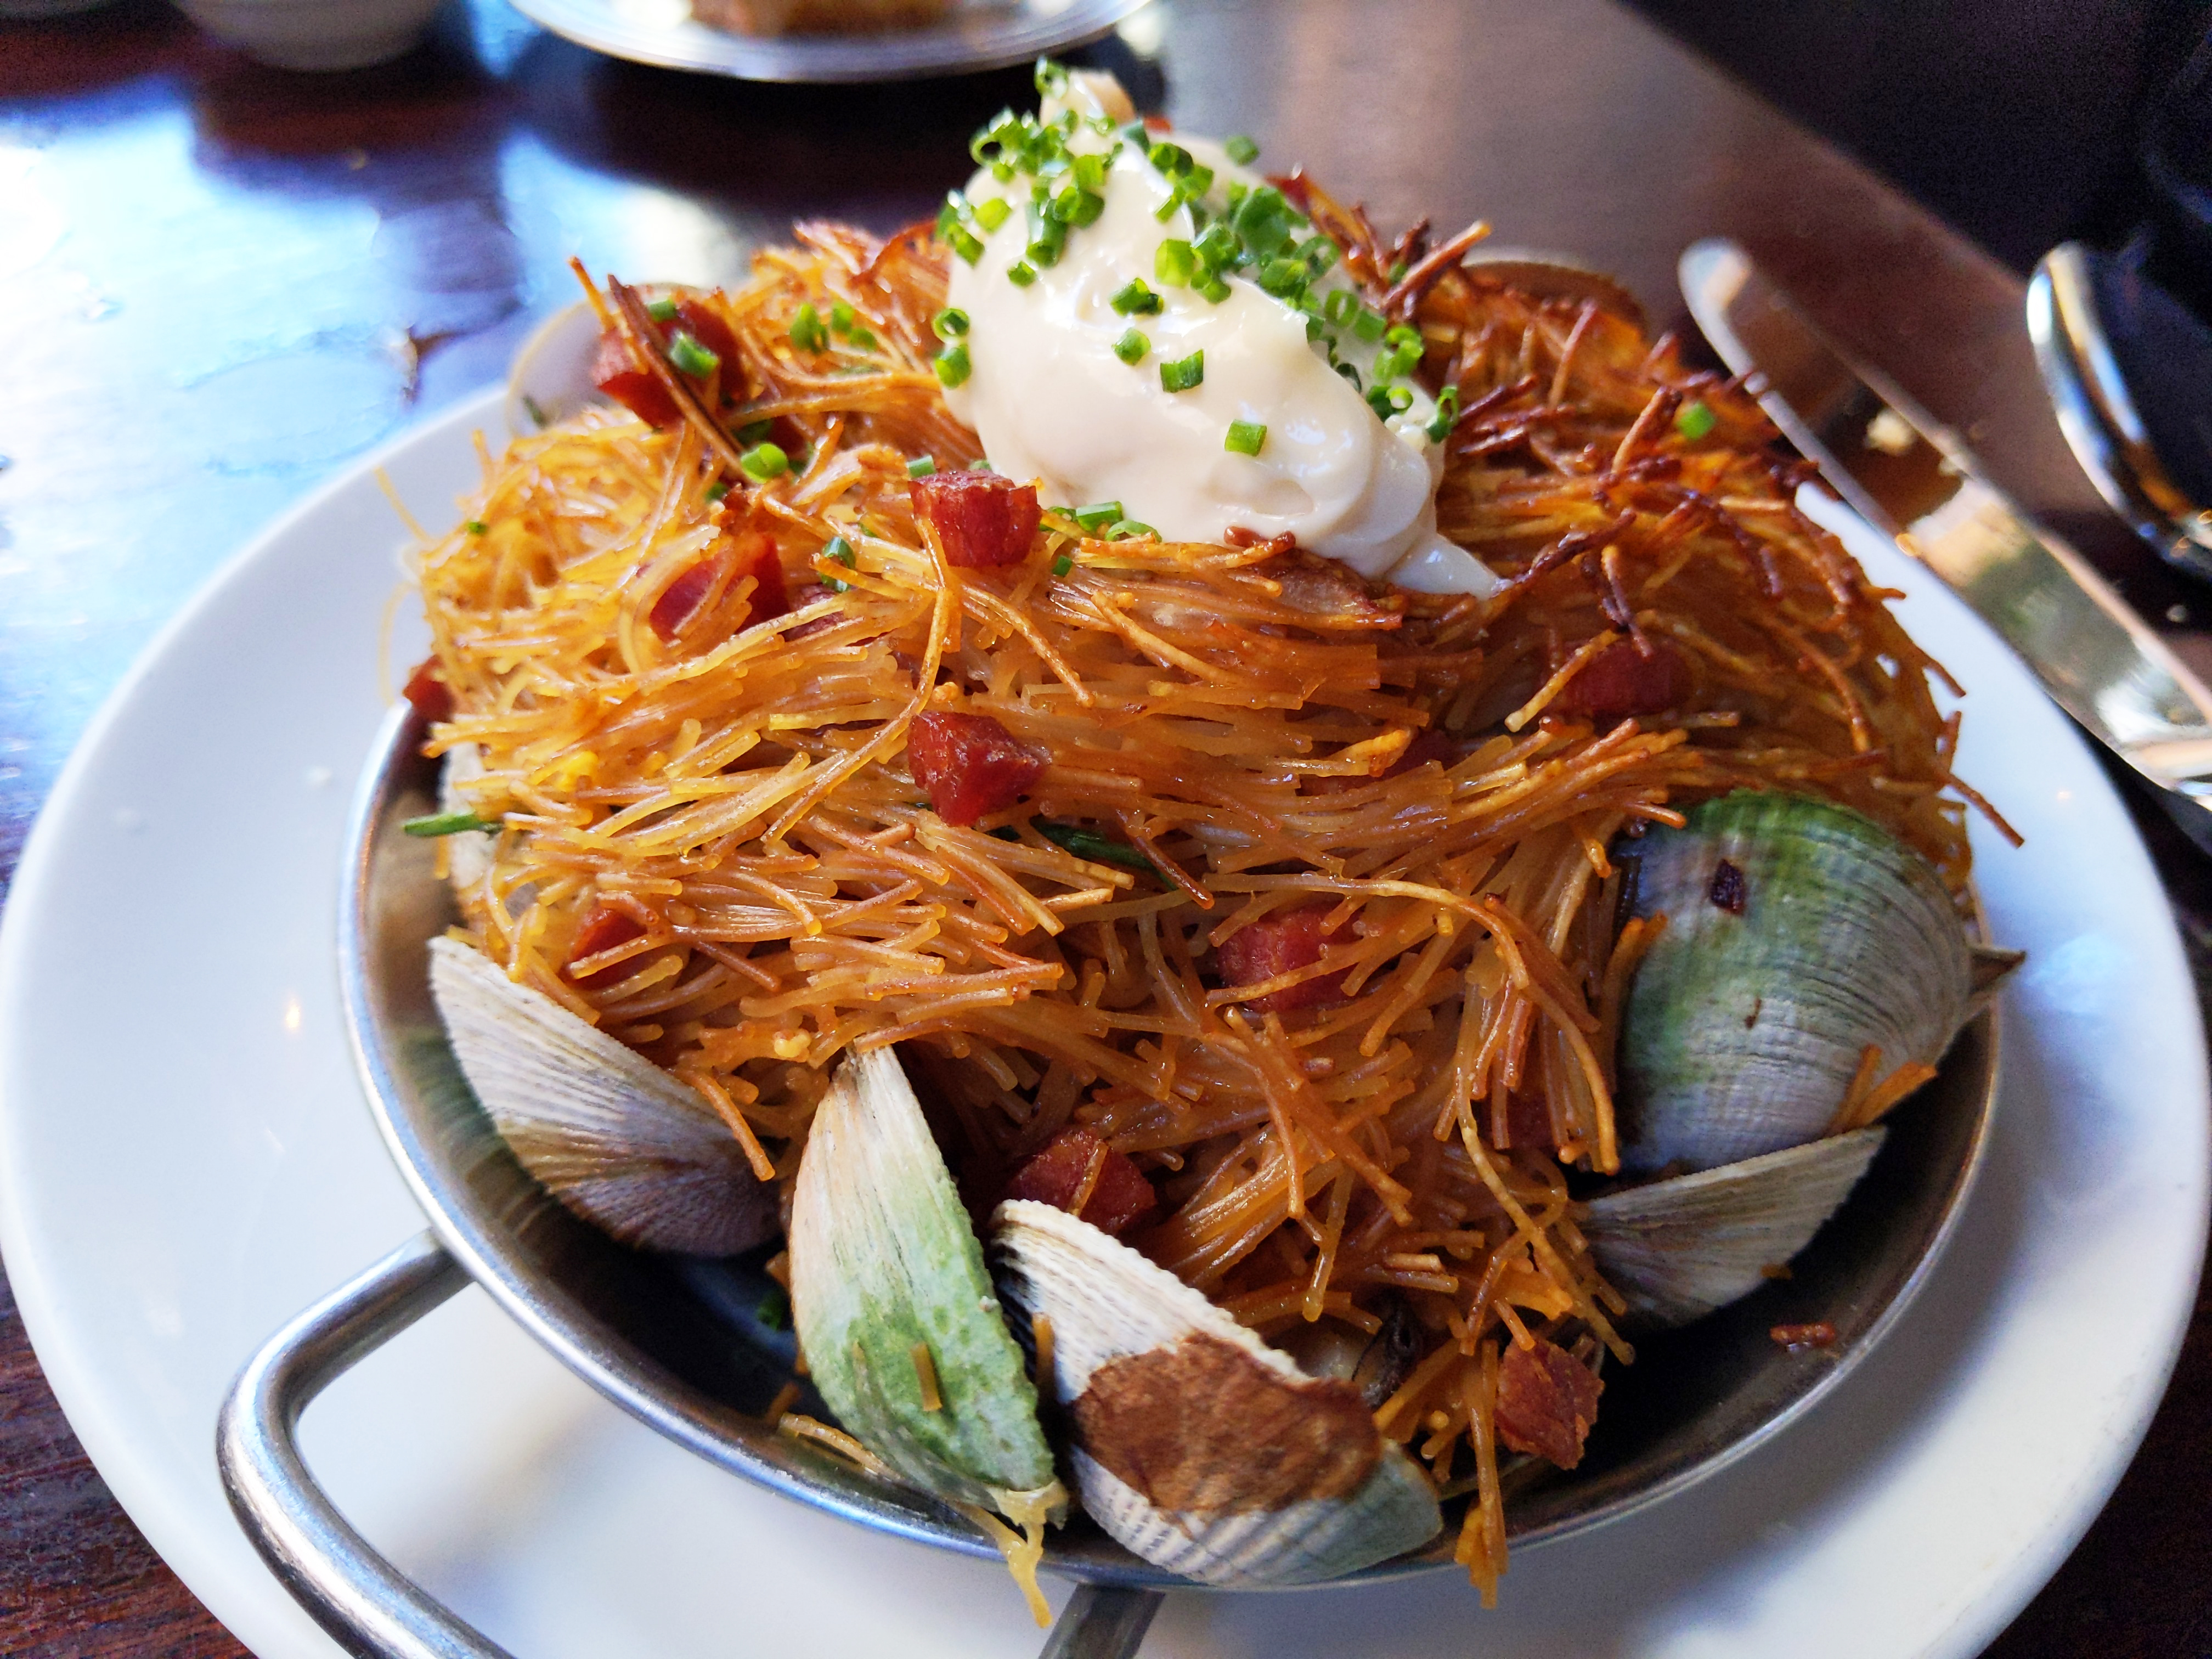 Dark brown toasted noodles interspersed with small in the shell clams, with creamy white dressing in a dollop on top.